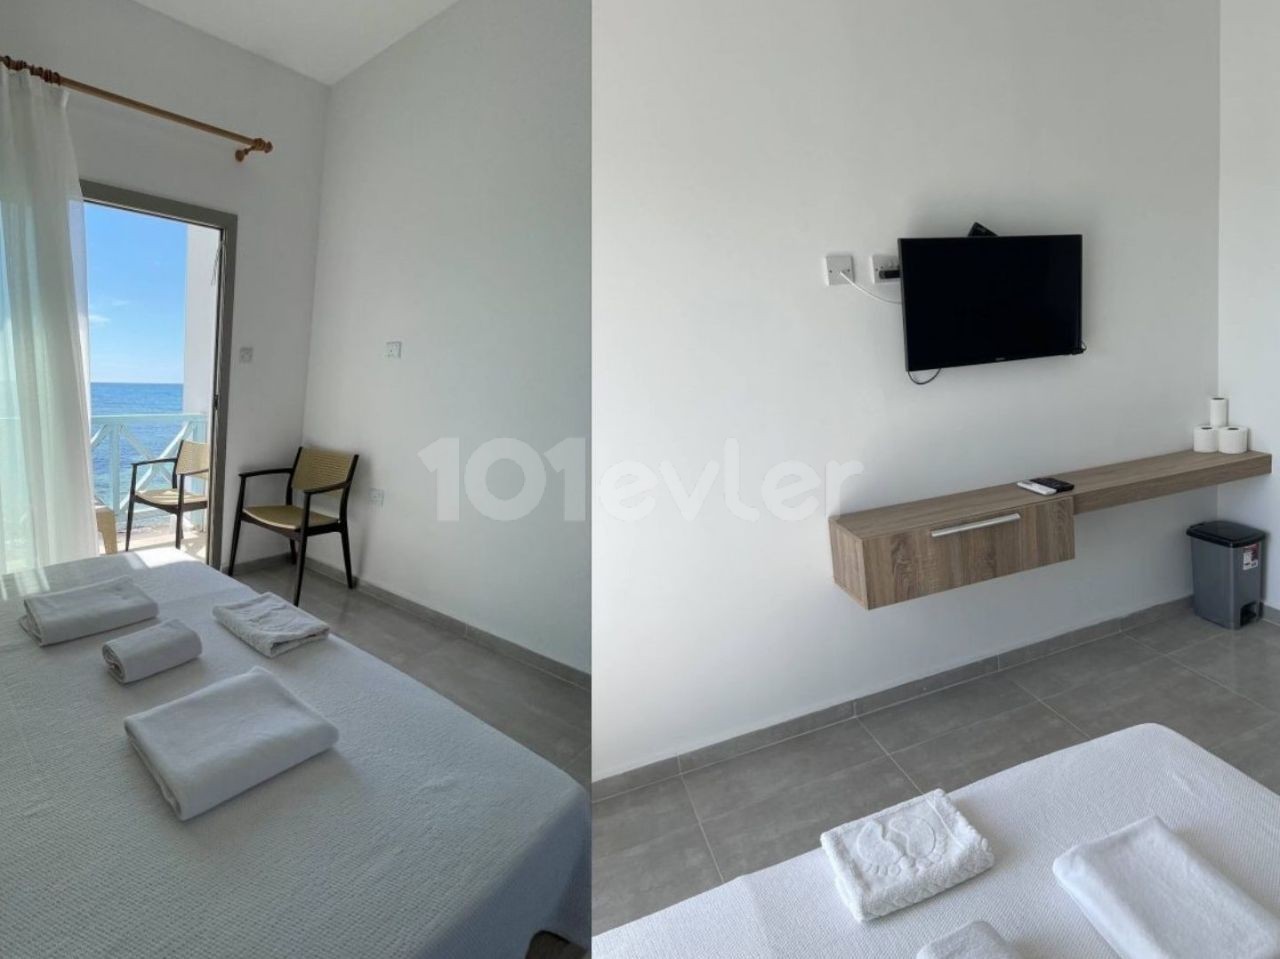 SEA FLATS FOR DAILY RENT IN DIPKARPAZ